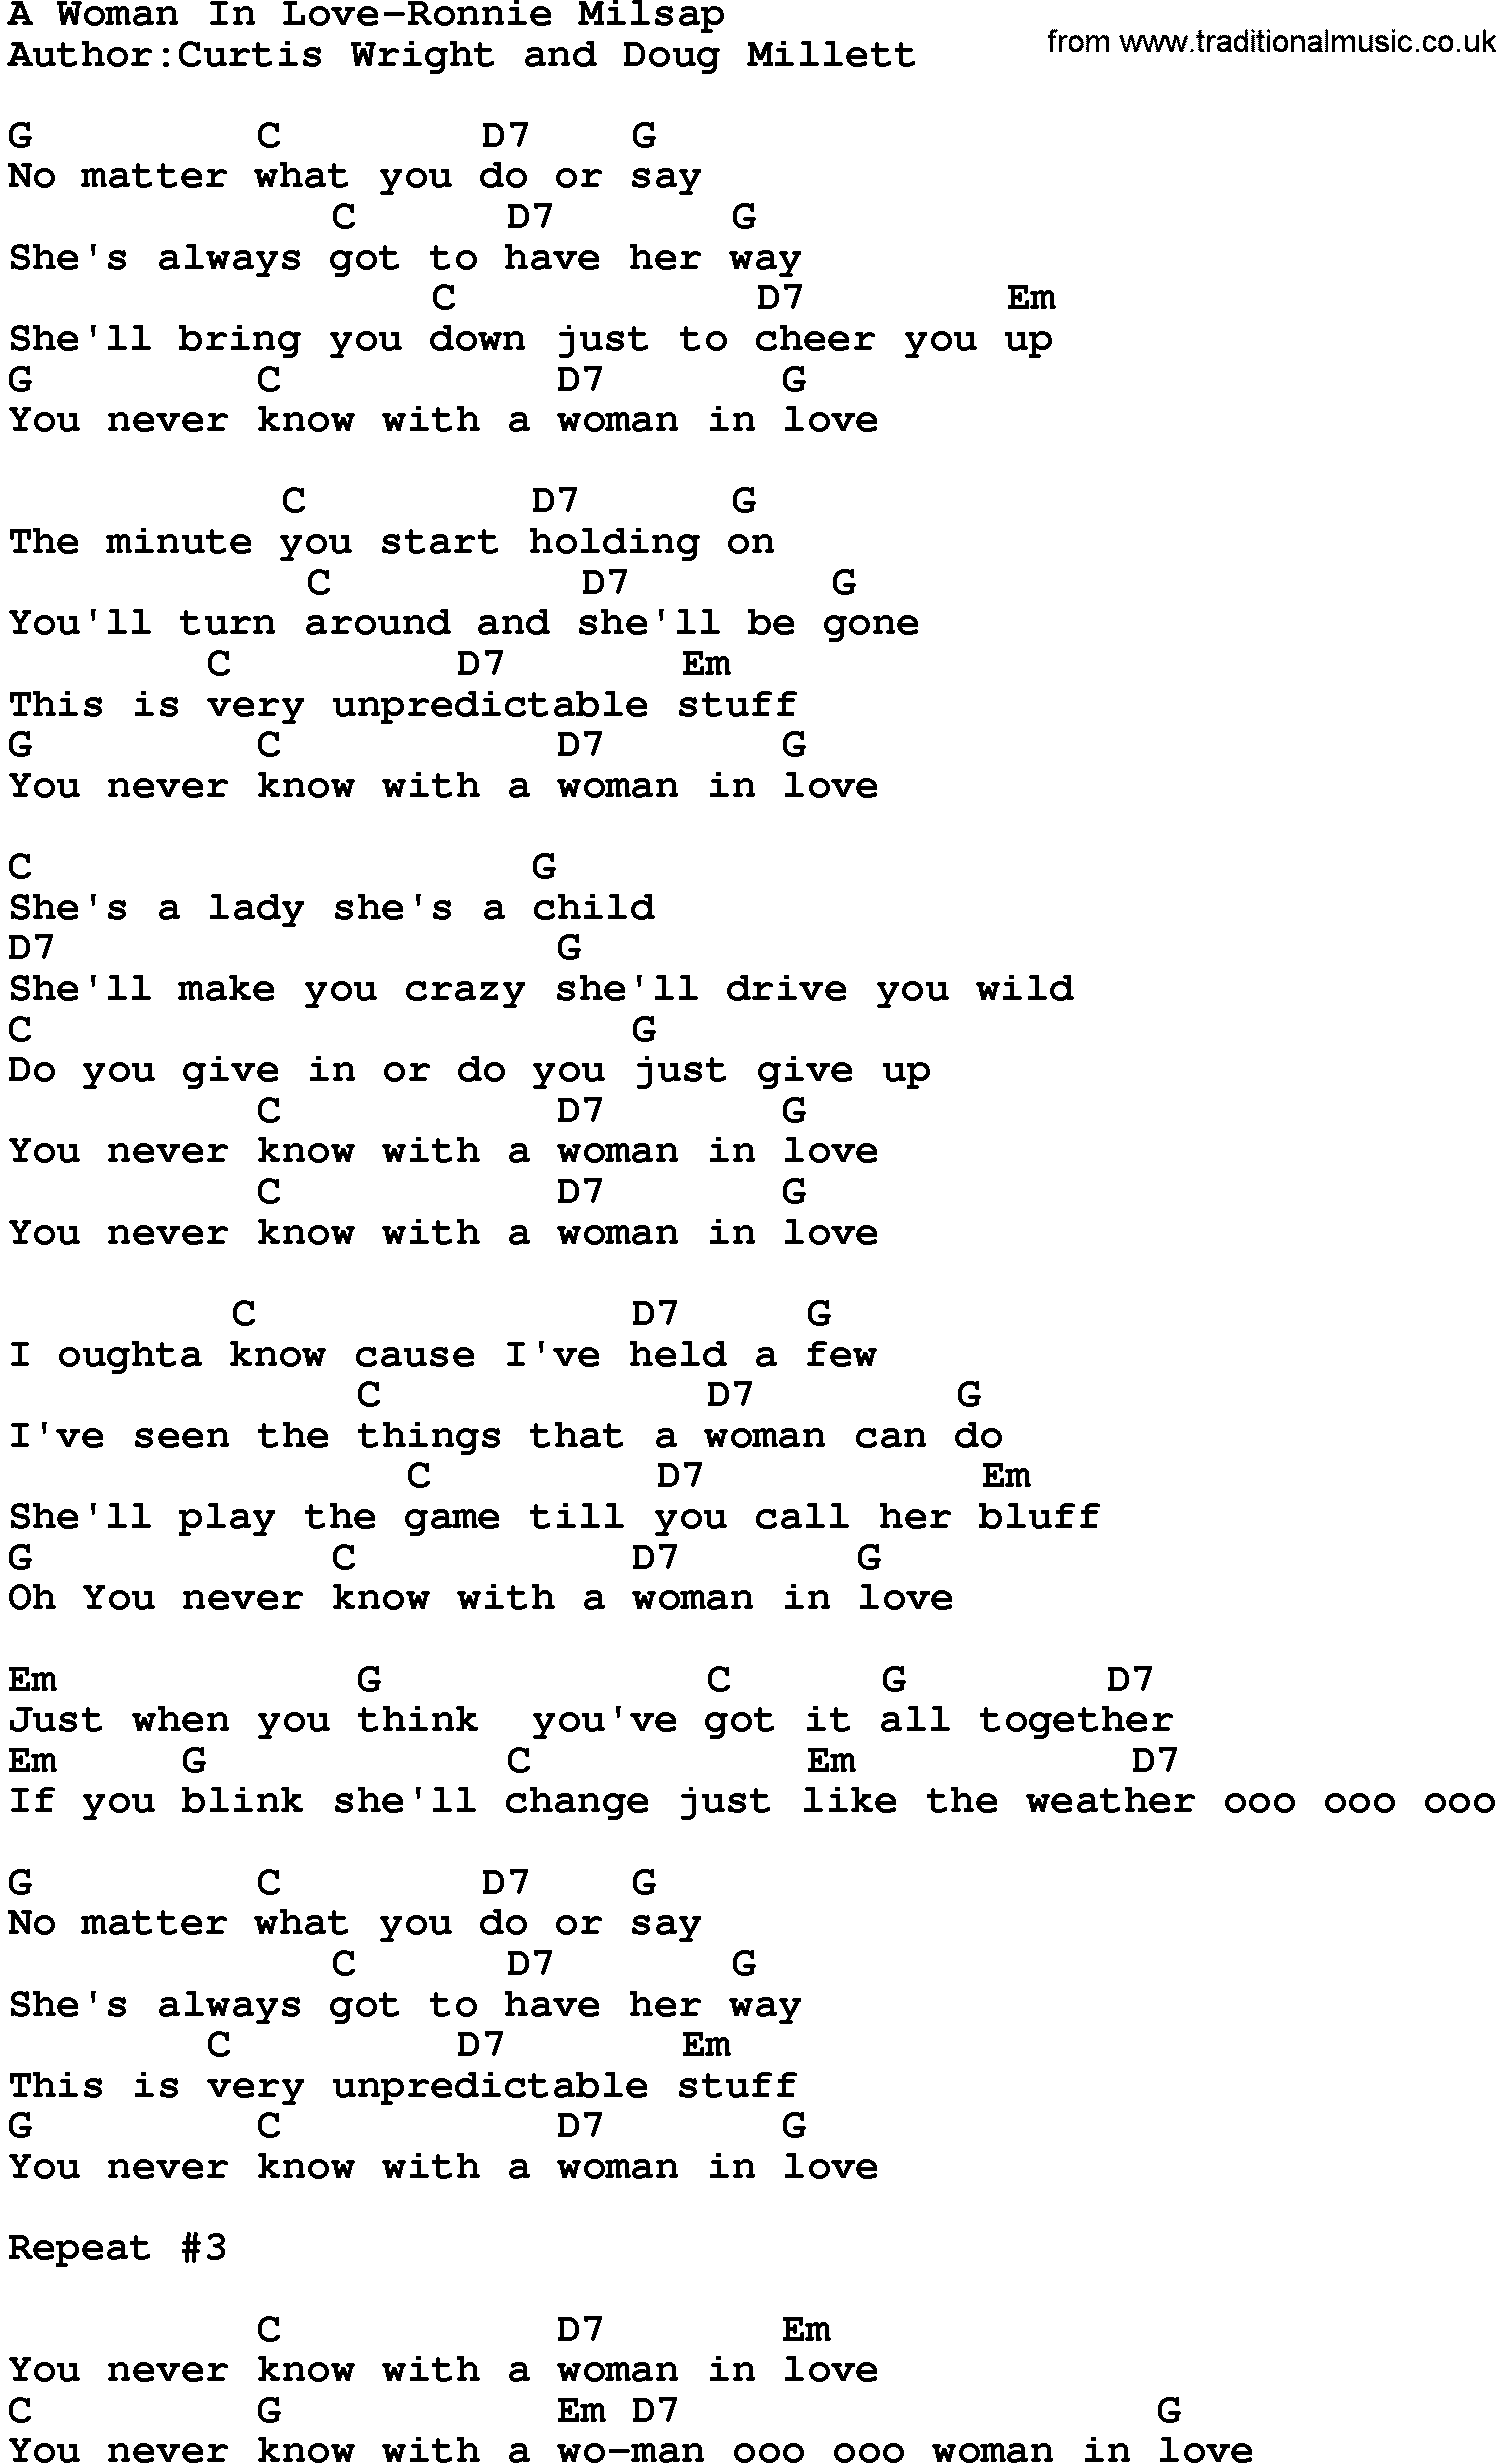 Country music song: A Woman In Love-Ronnie Milsap lyrics and chords